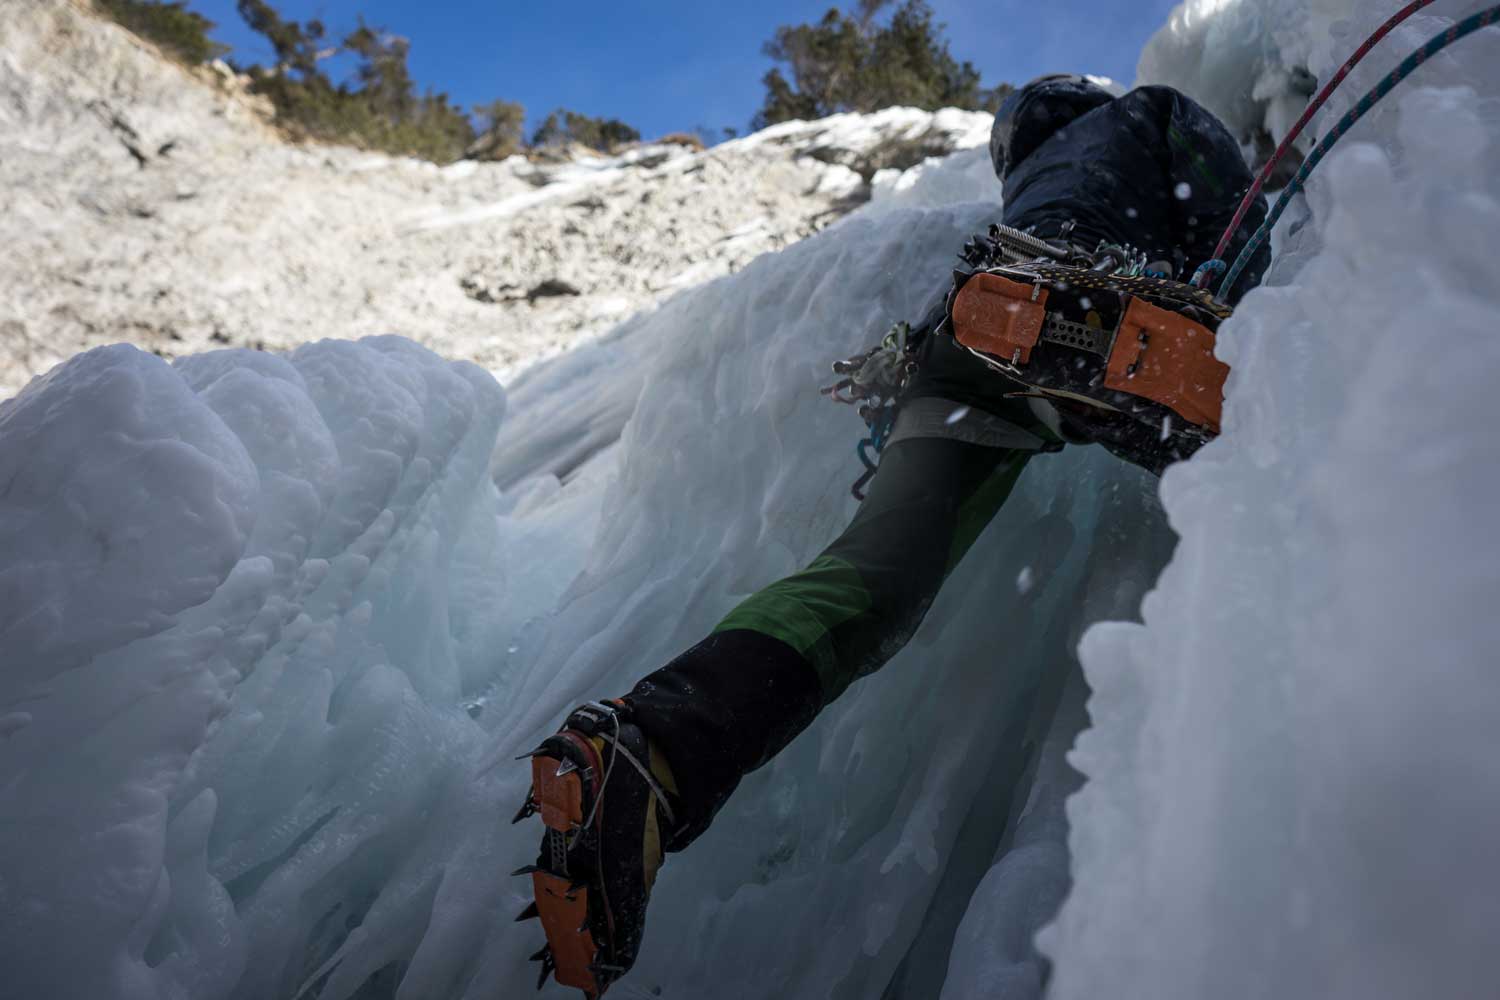 Crampons and ice climbing.